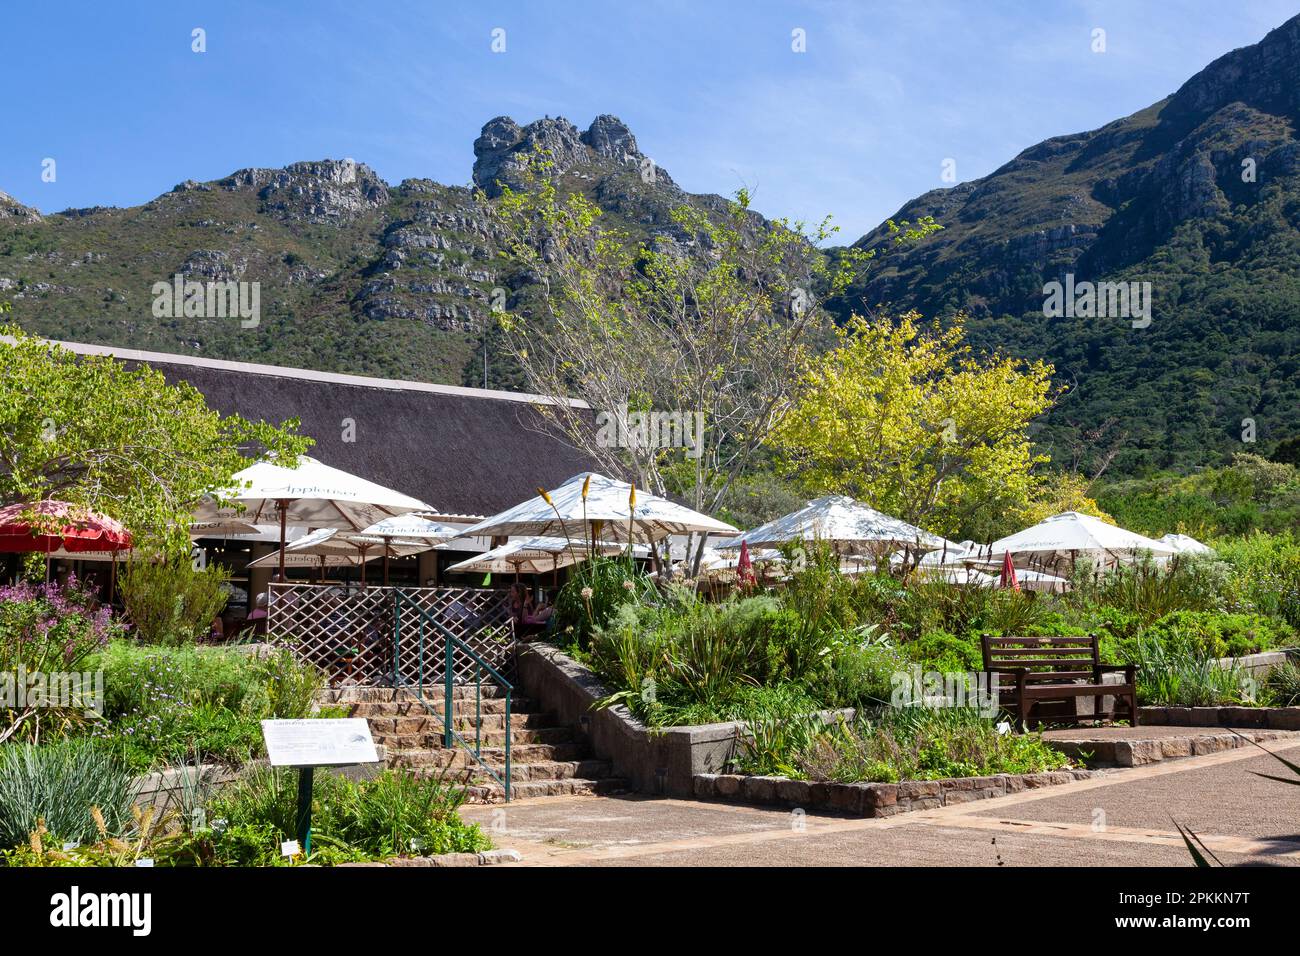 Restaurant at Kirstenbosch Botanical Garden, Cape Town, Western Cape, South Africa with a view to Castle Rock and tourists eating on the open air terr Stock Photo